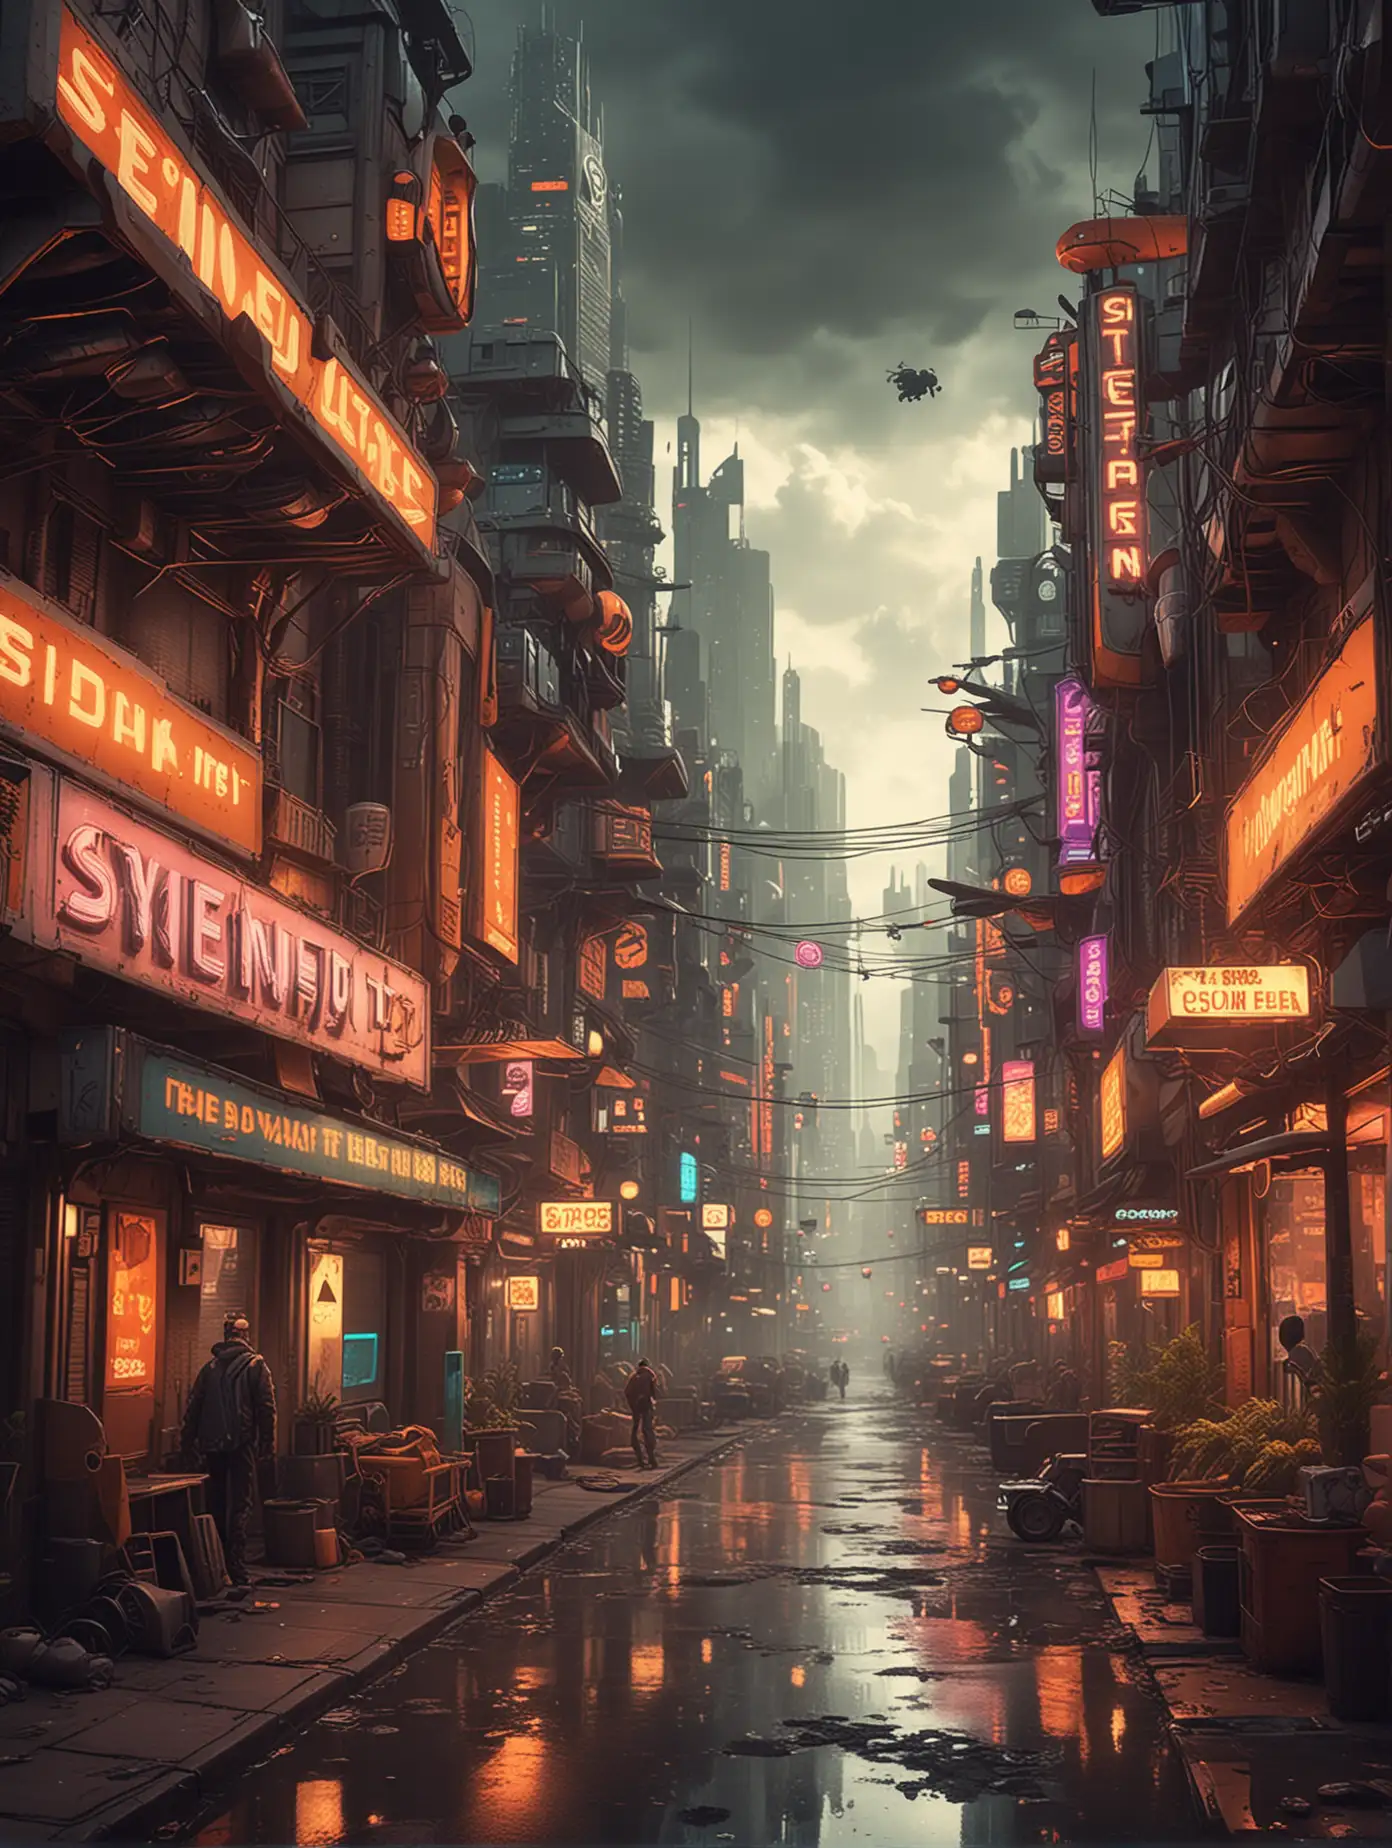 Theme: Sci-fi city, Style: Futuristic, Scene: High-tech metropolis, Flyers, Skyscrapers, Digger's den, Characters: Undercity merchant, Actions: Walking, Flying, Color scheme: Neon lights, Warm color palette, Time: Afternoon on a cloudy day, Effects: Light tracing, Dynamic blur